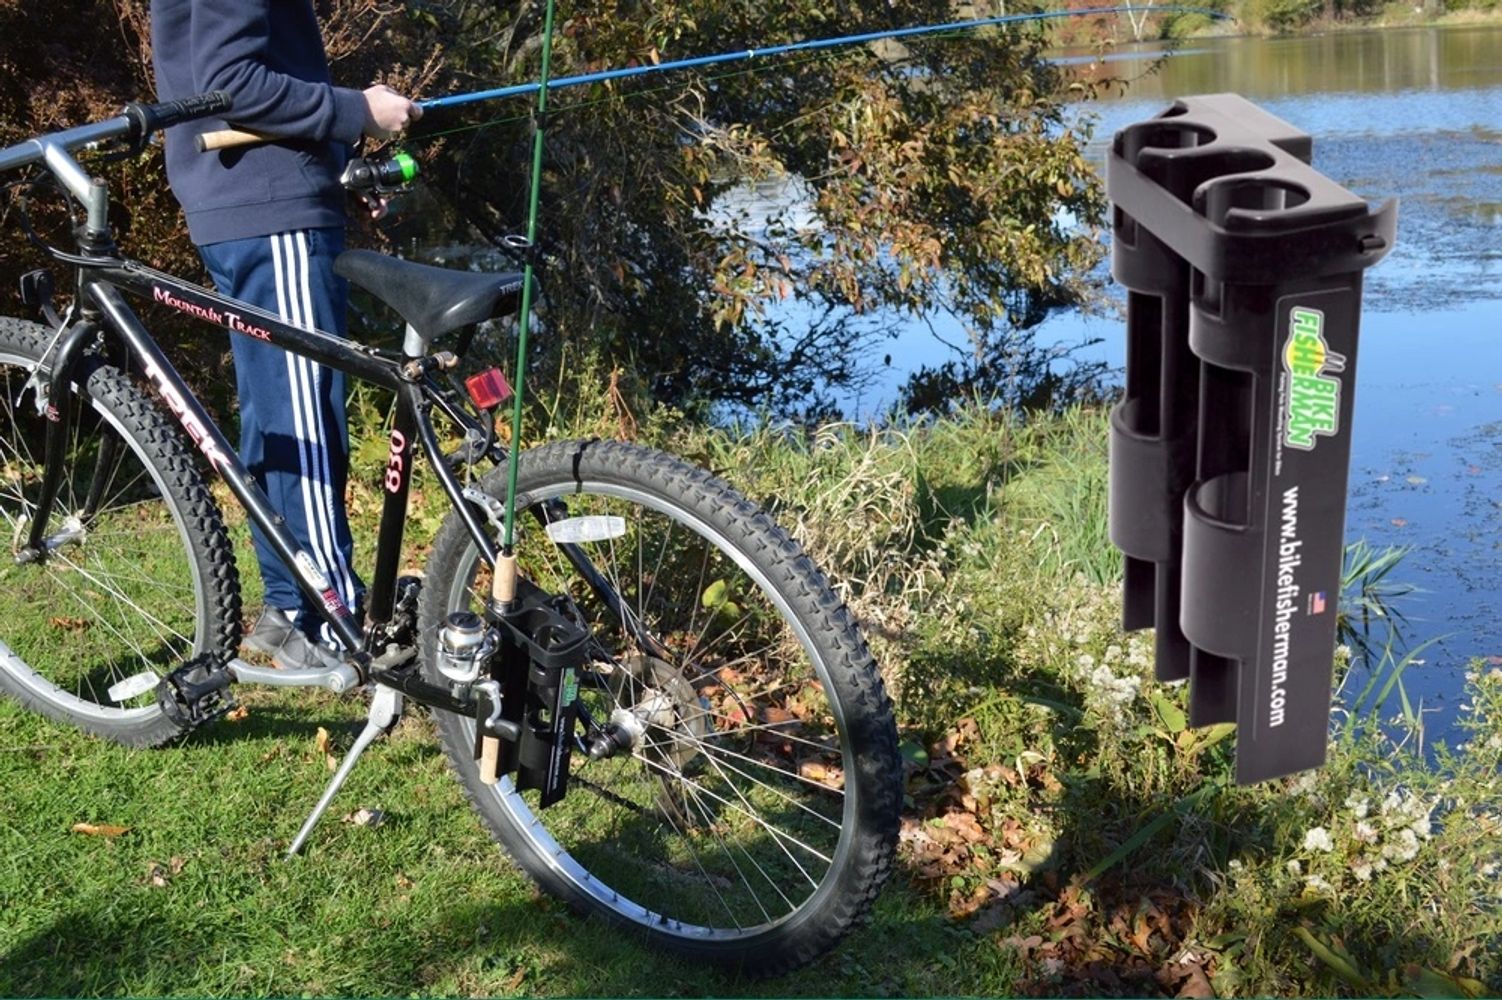  Bike Fishing Rod Holder-Fishing Rods Are Securely